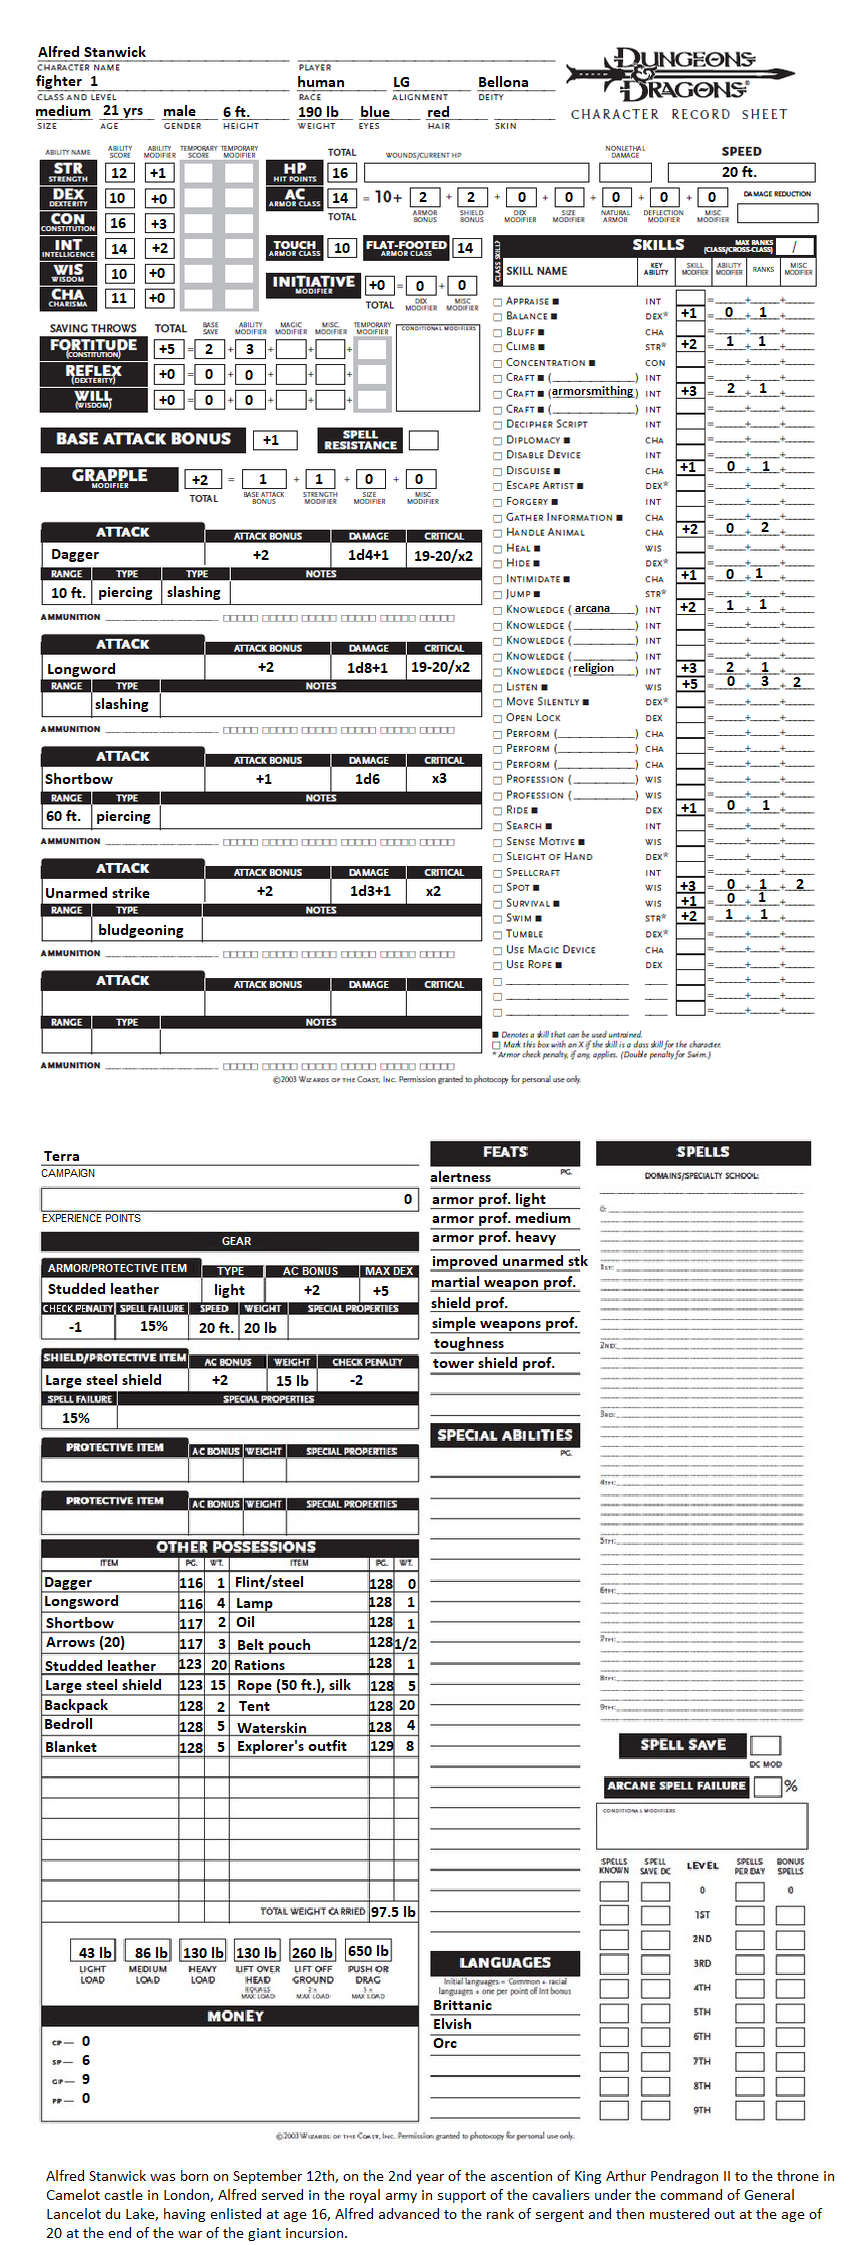 character_sheet_alfred_stanwick_by_thomasbowman767-dcoe508.png